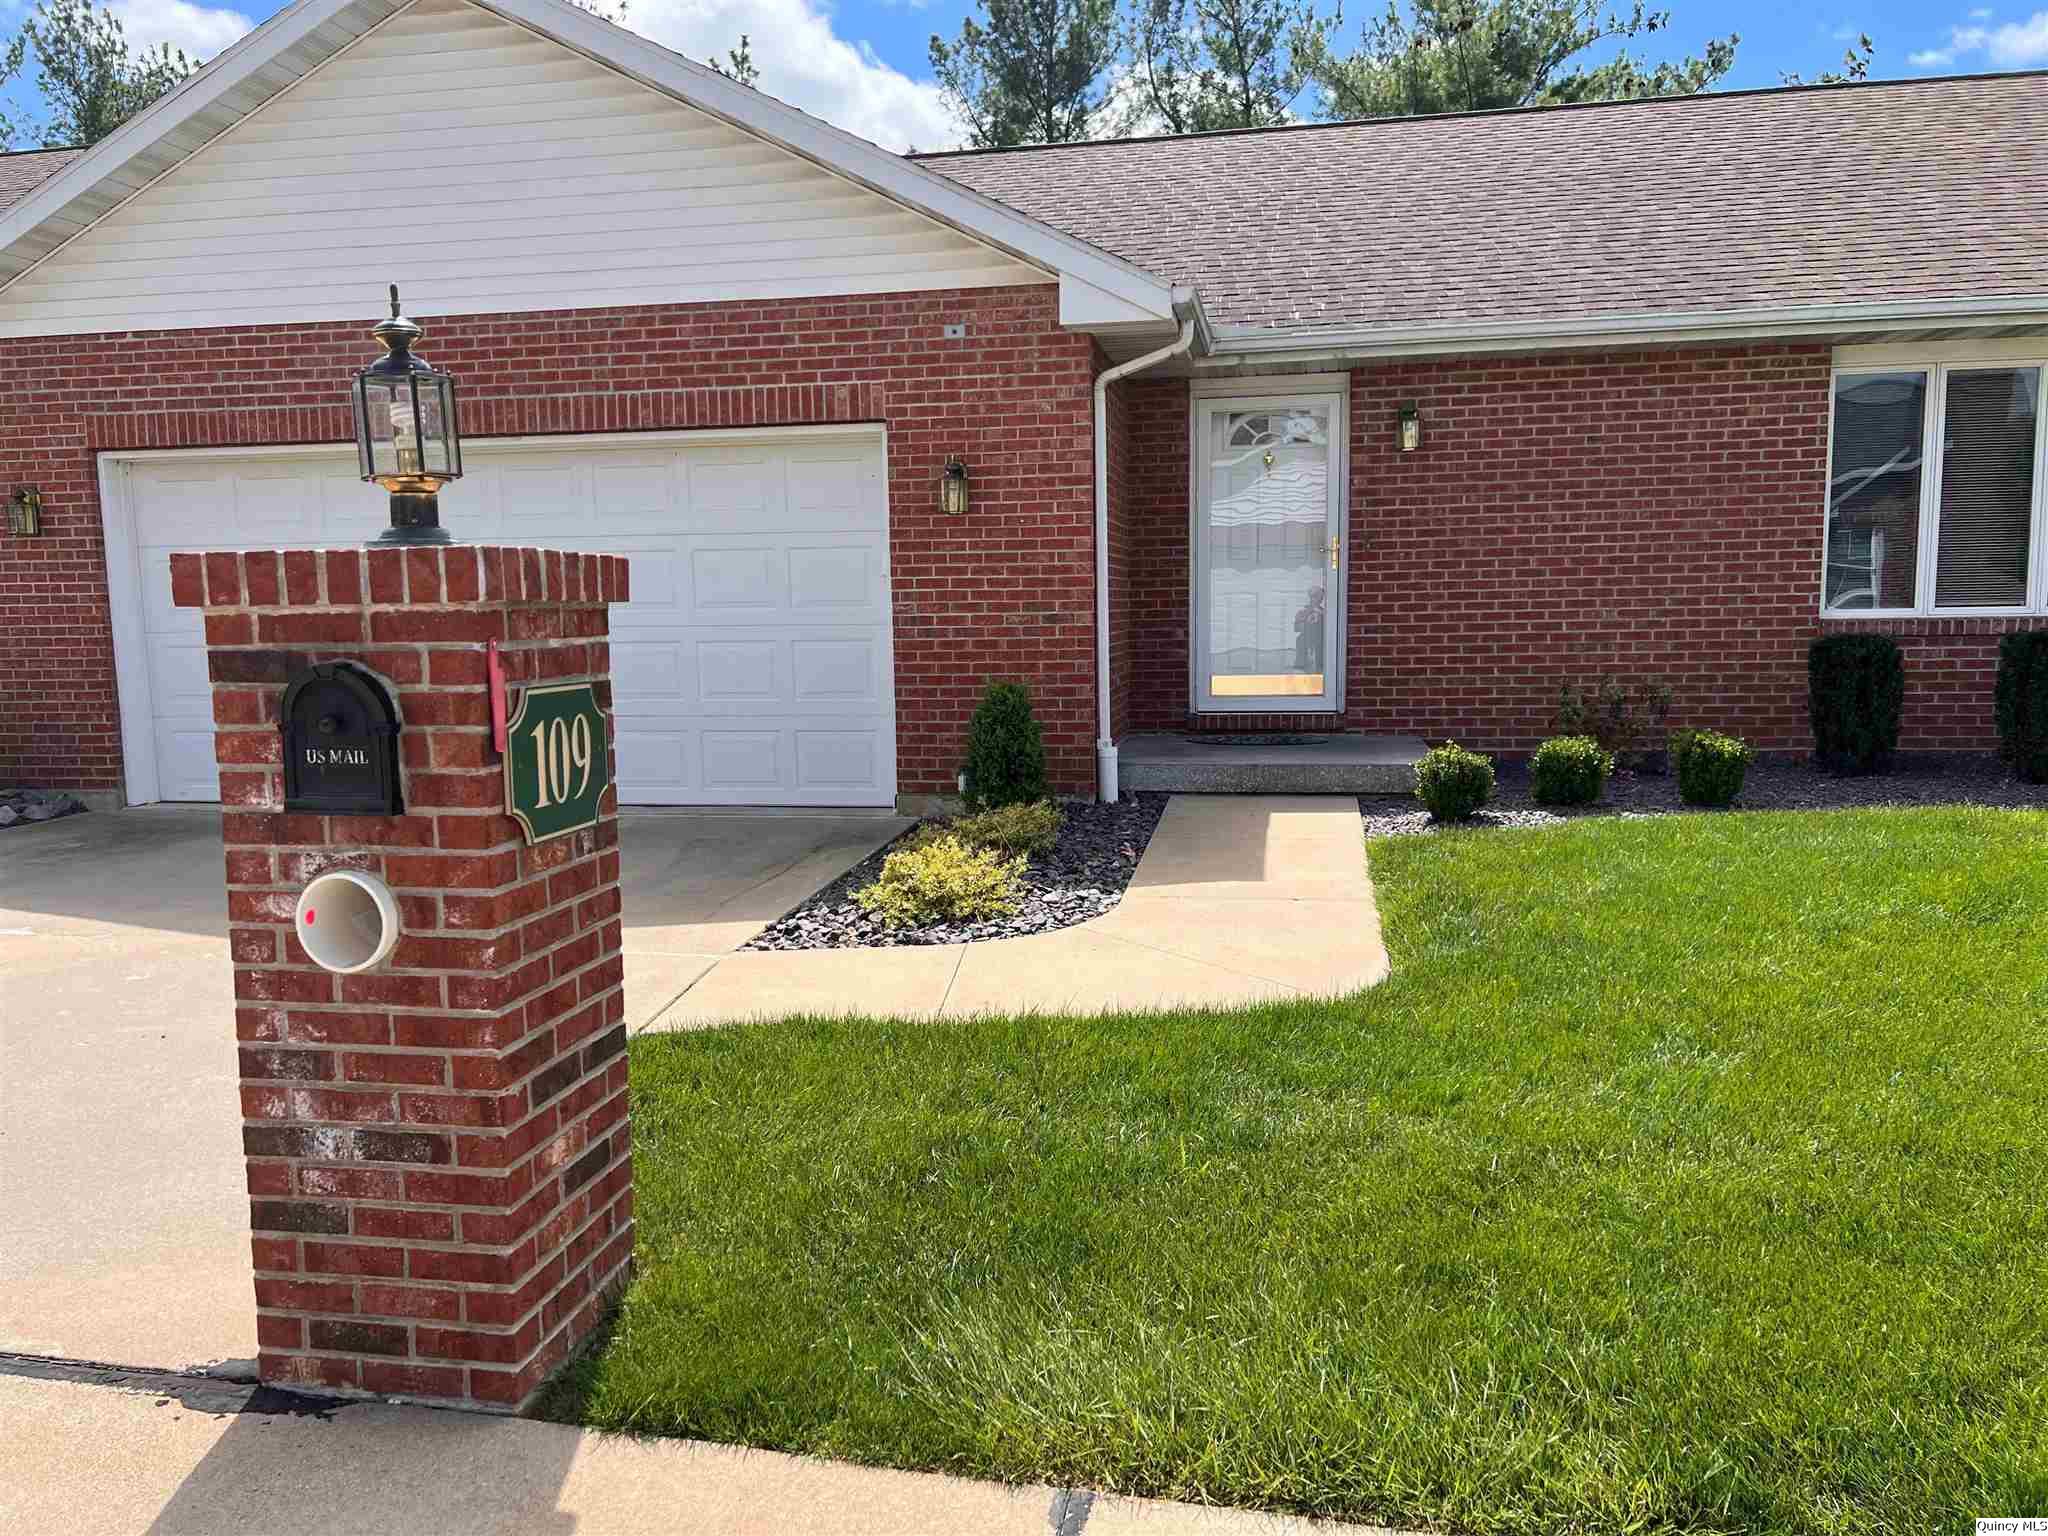 109 E Waterford, Quincy, Illinois 62305, 2 Bedrooms Bedrooms, ,2 BathroomsBathrooms,Residential,For Sale,109 E Waterford,203368